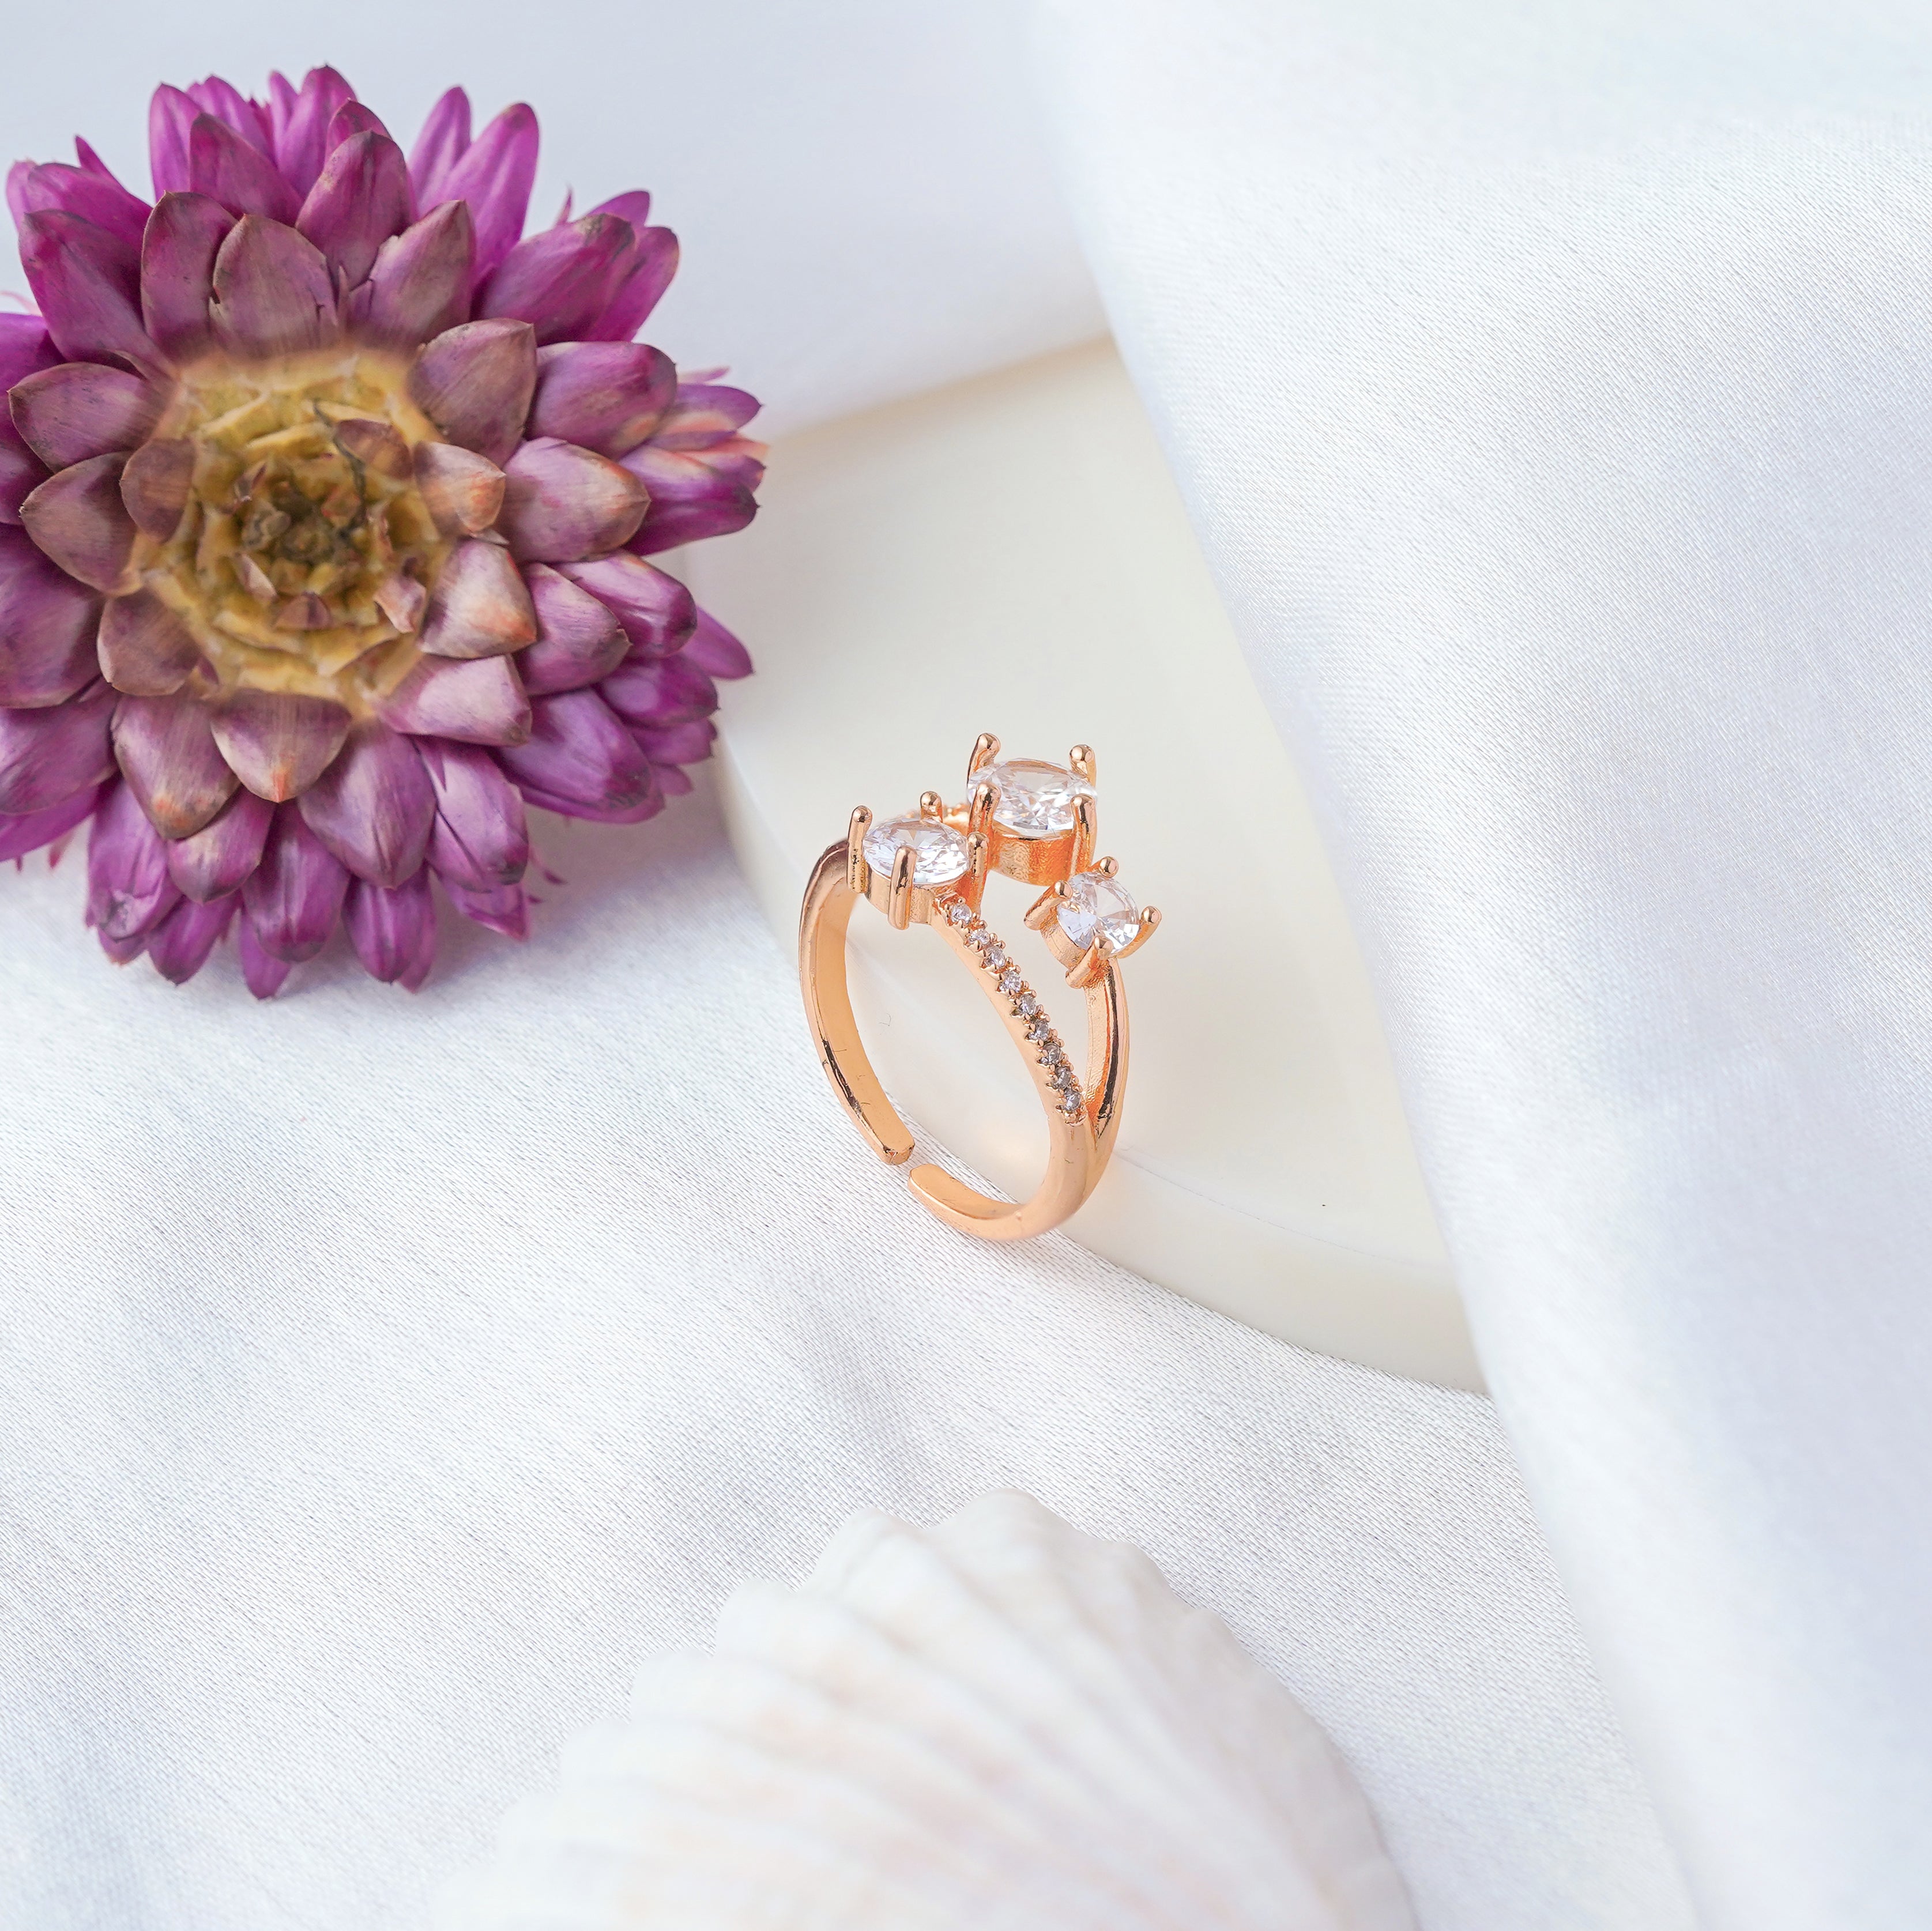 Jewelsium Impressive Rose Gold Designer Ring: Captivate Hearts with Timeless Charm